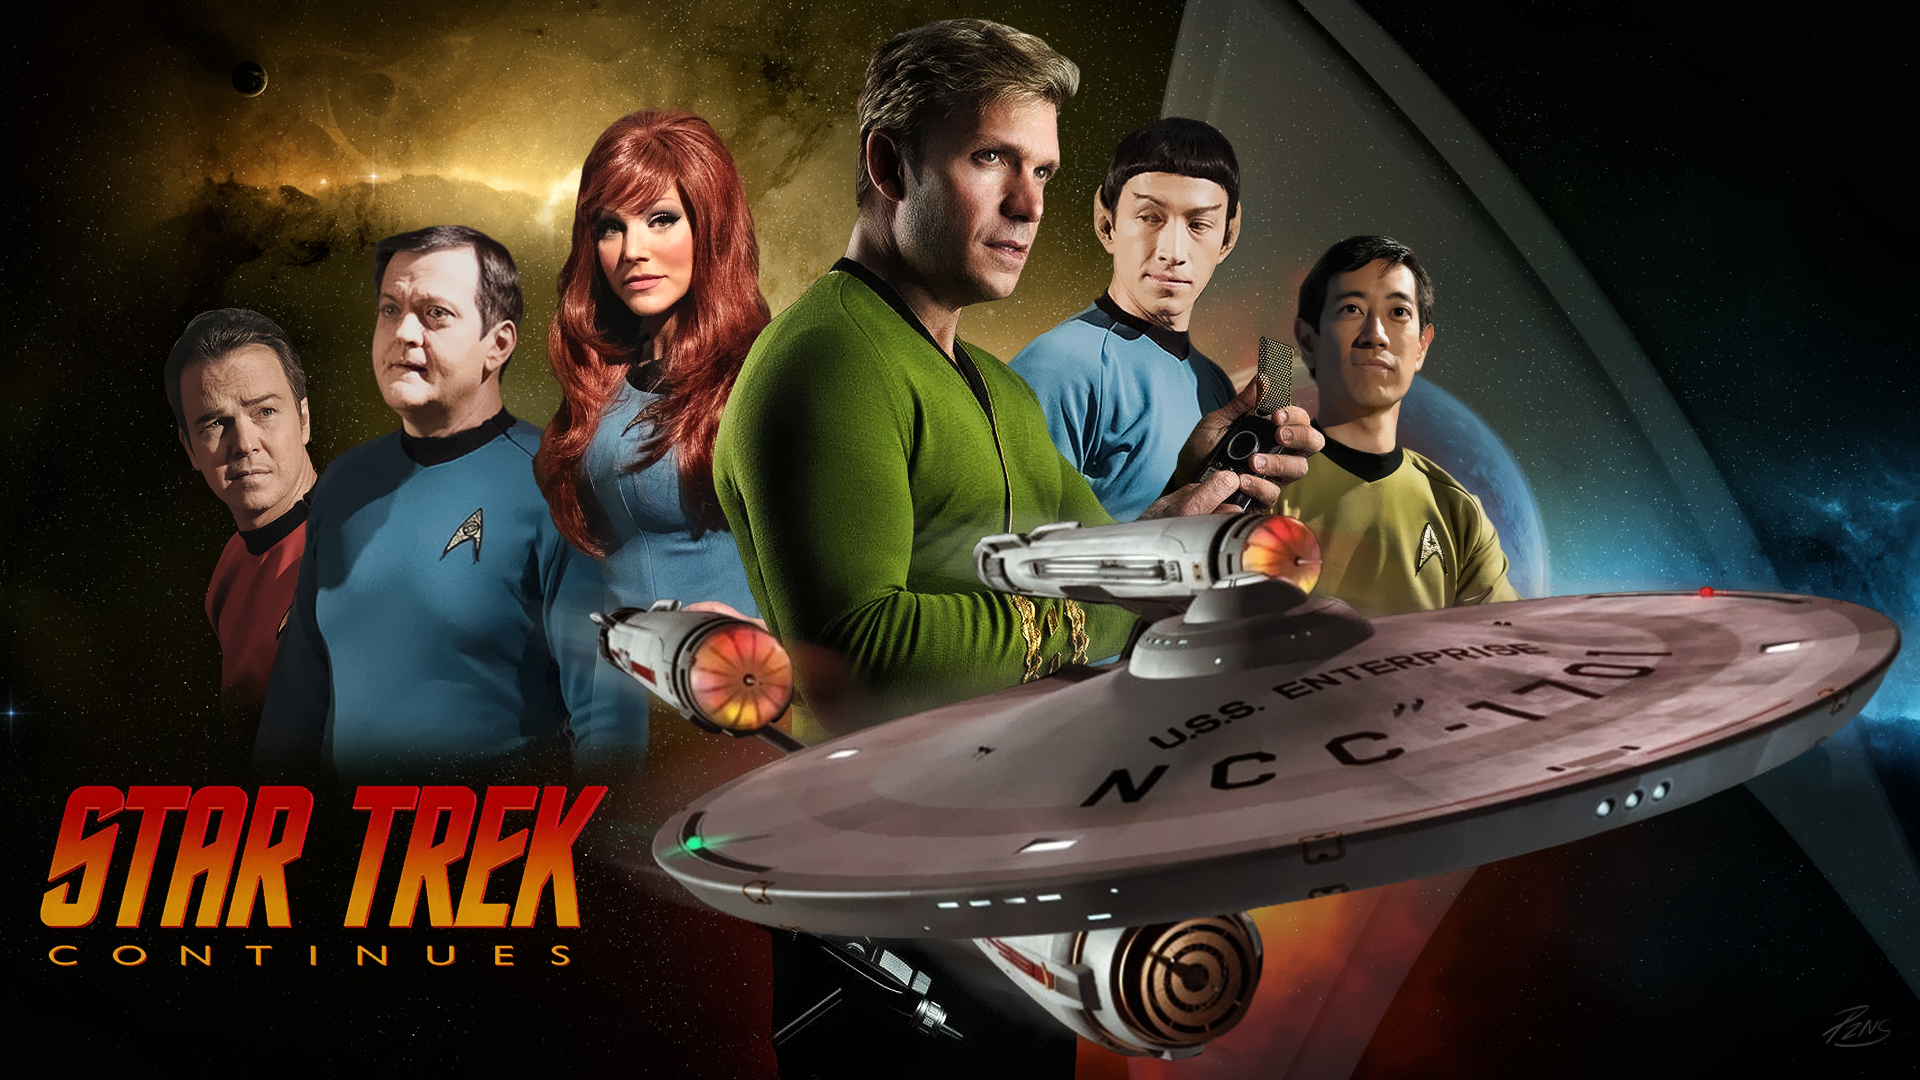 star trek continues cast and crew